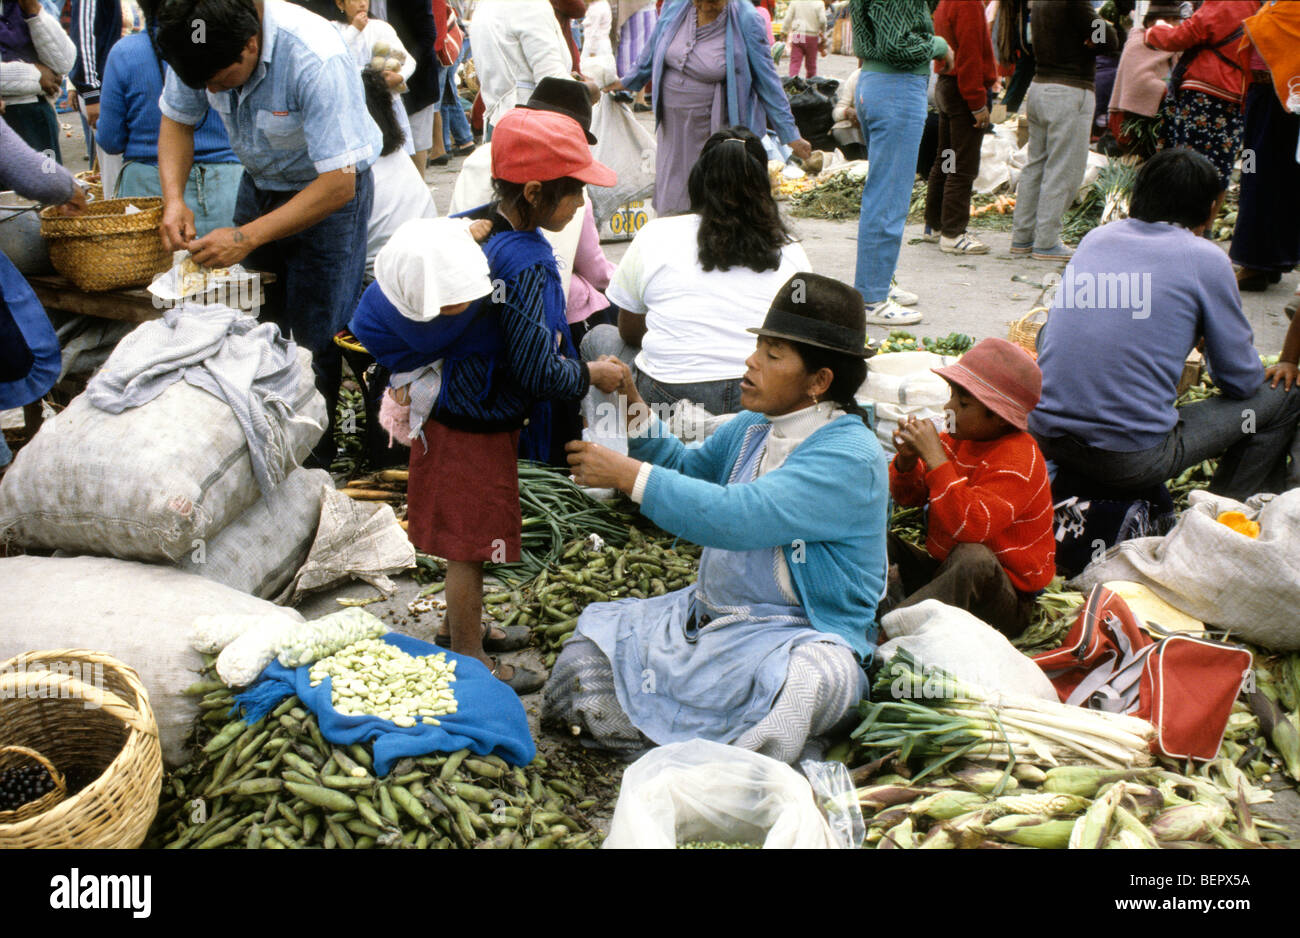 Women and her family selling fava beans in local upland Ecuador market. Stock Photo